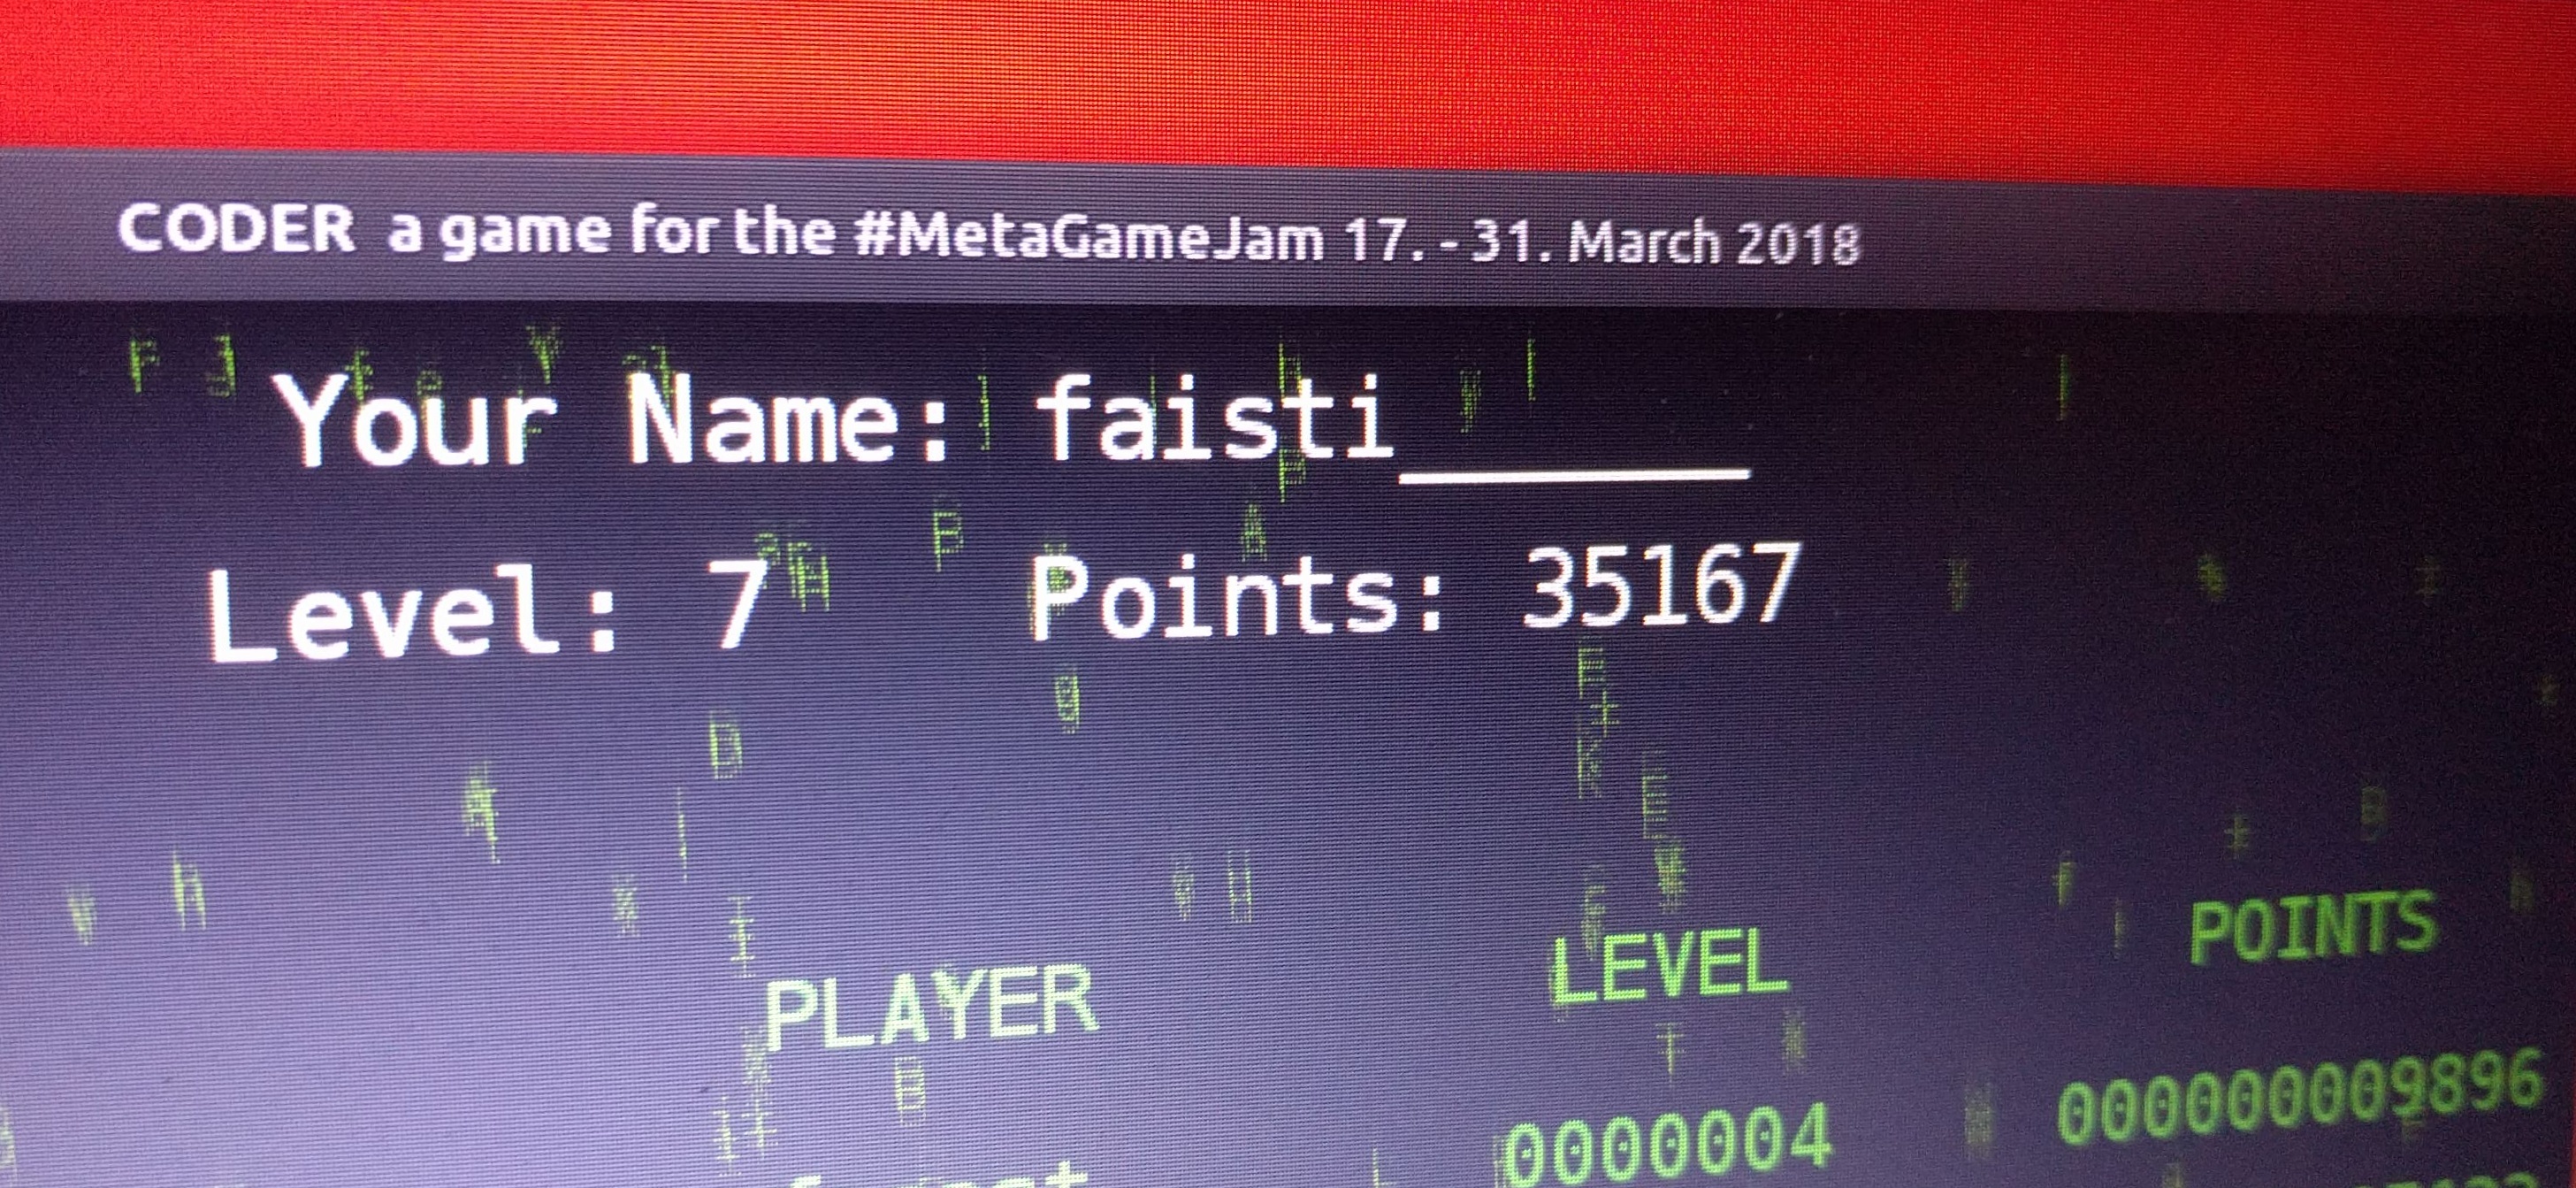 Coding game. Game Coder программа. Meta game Jam. Points for Level of the game. Game one codes